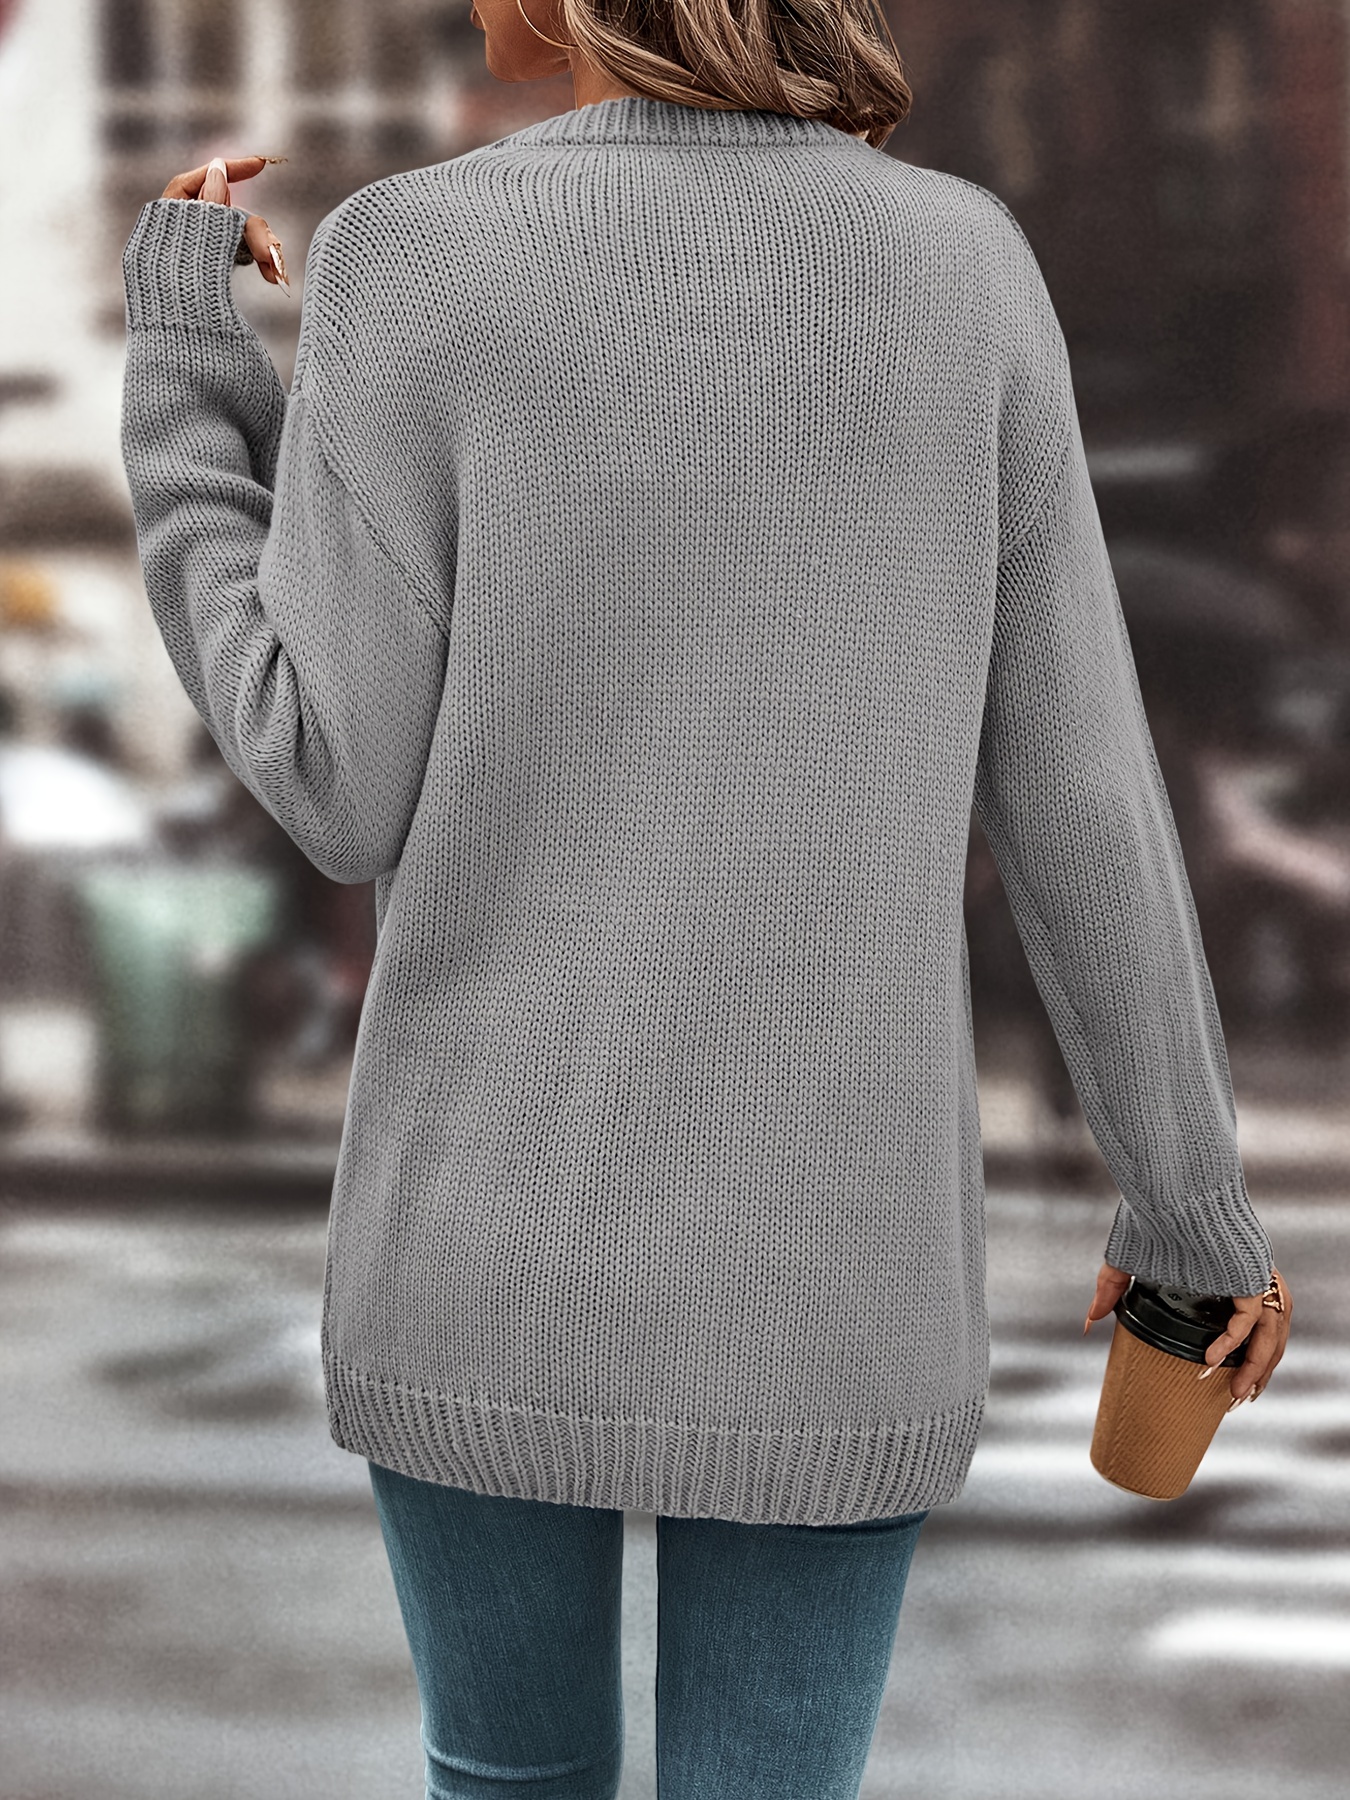 Oversized Open Knit Jumper With Pocket